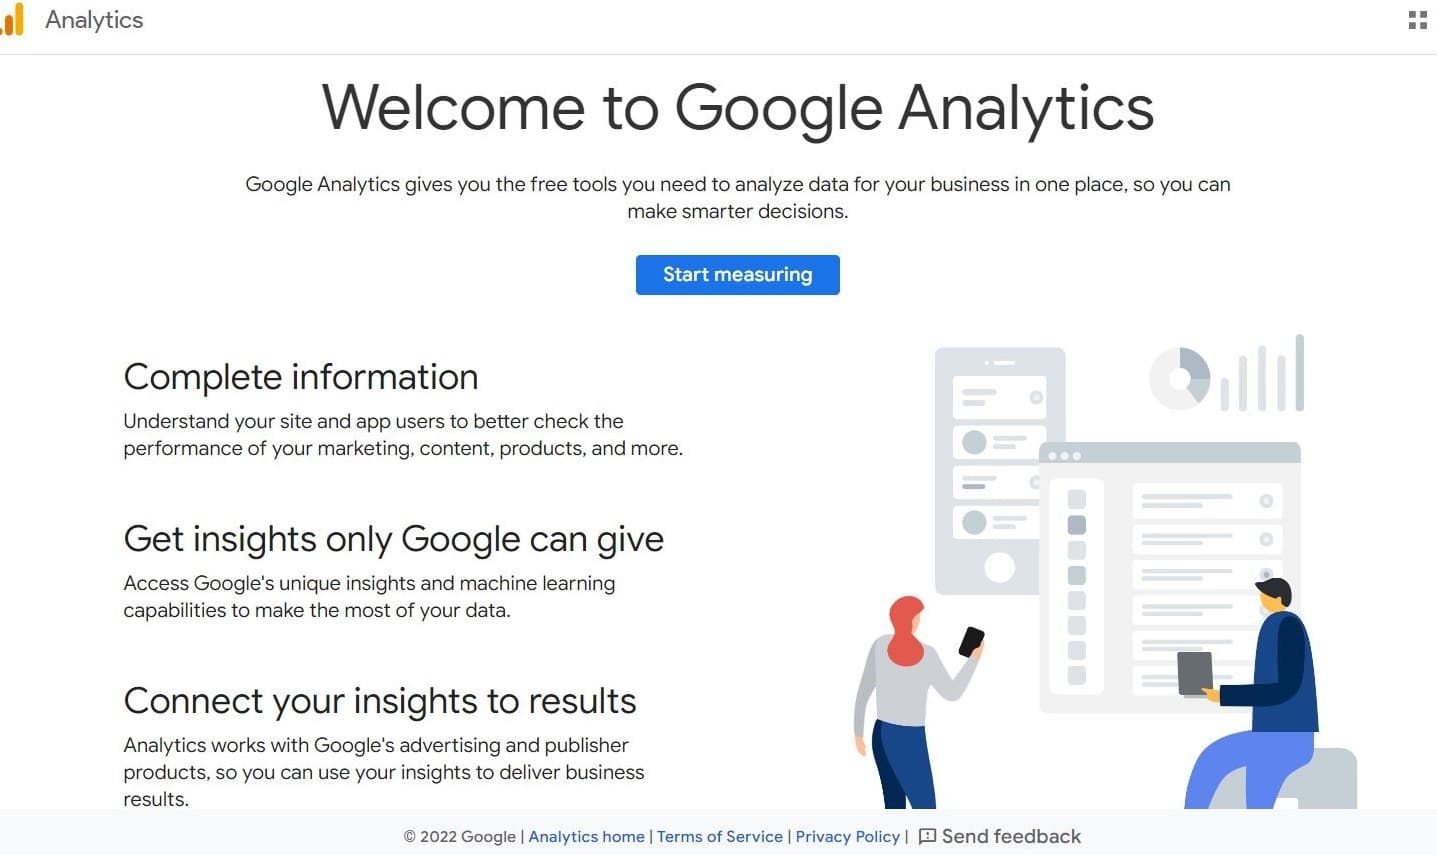 The Google Analytics homepage with the categories "Complete information," "Get insights only Google can give," and "Connect your insights to results".